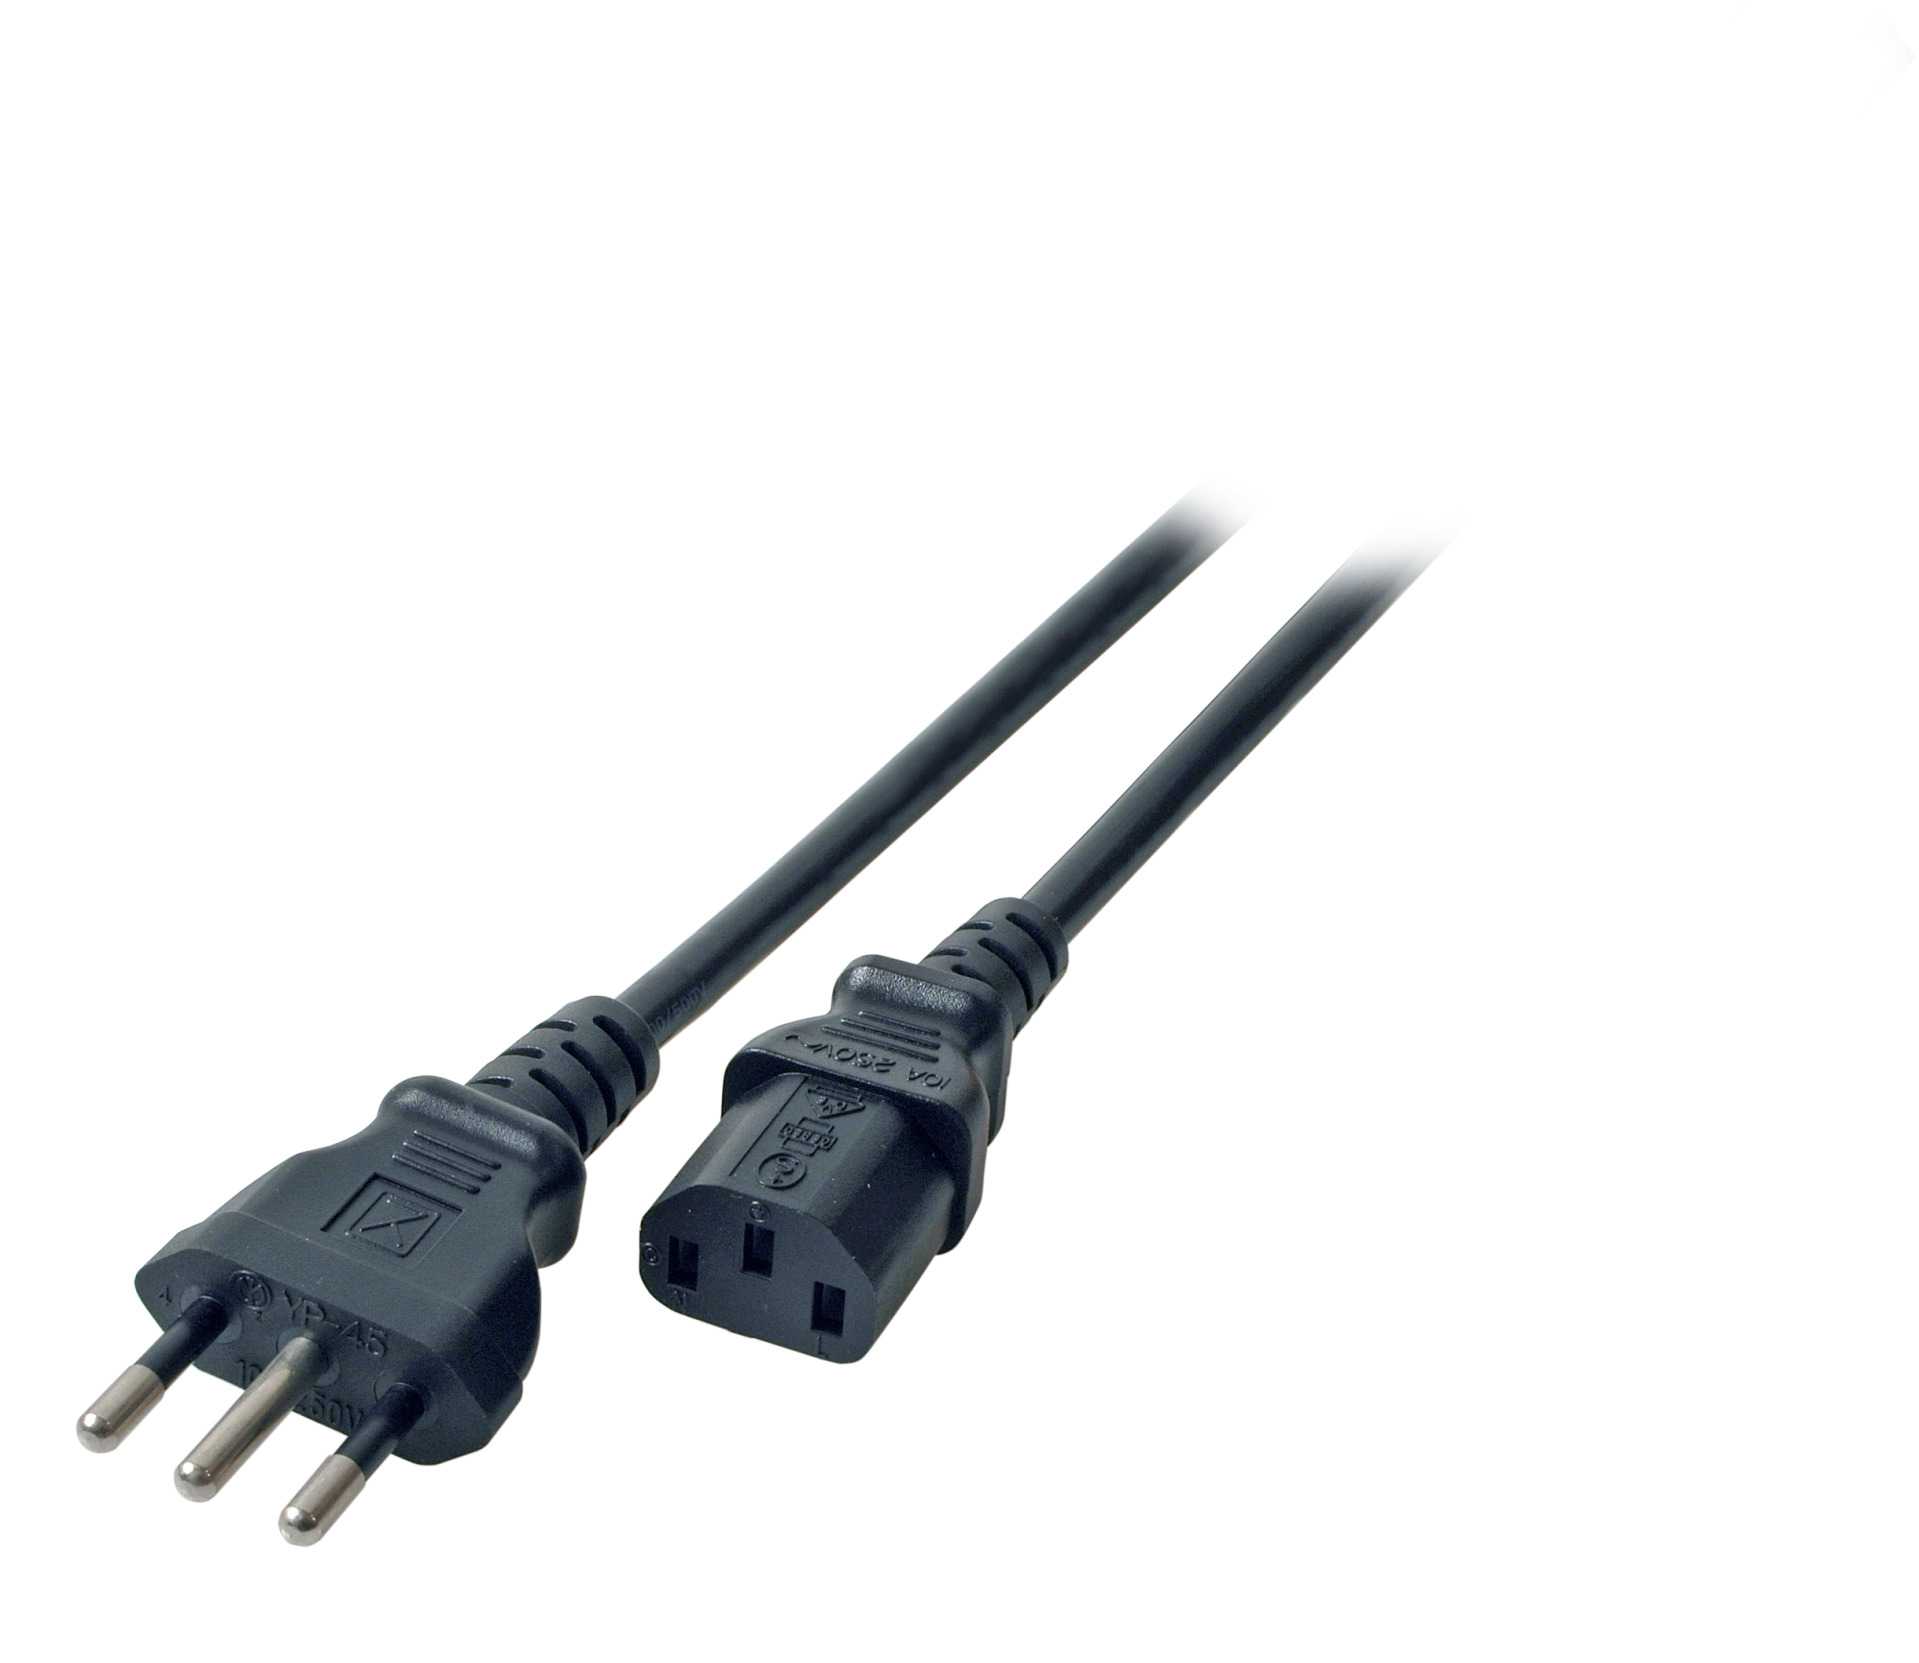 Power Cable Italy Type L - C13 180°, Black, 1.8 m, 3 x 0.75 mm²